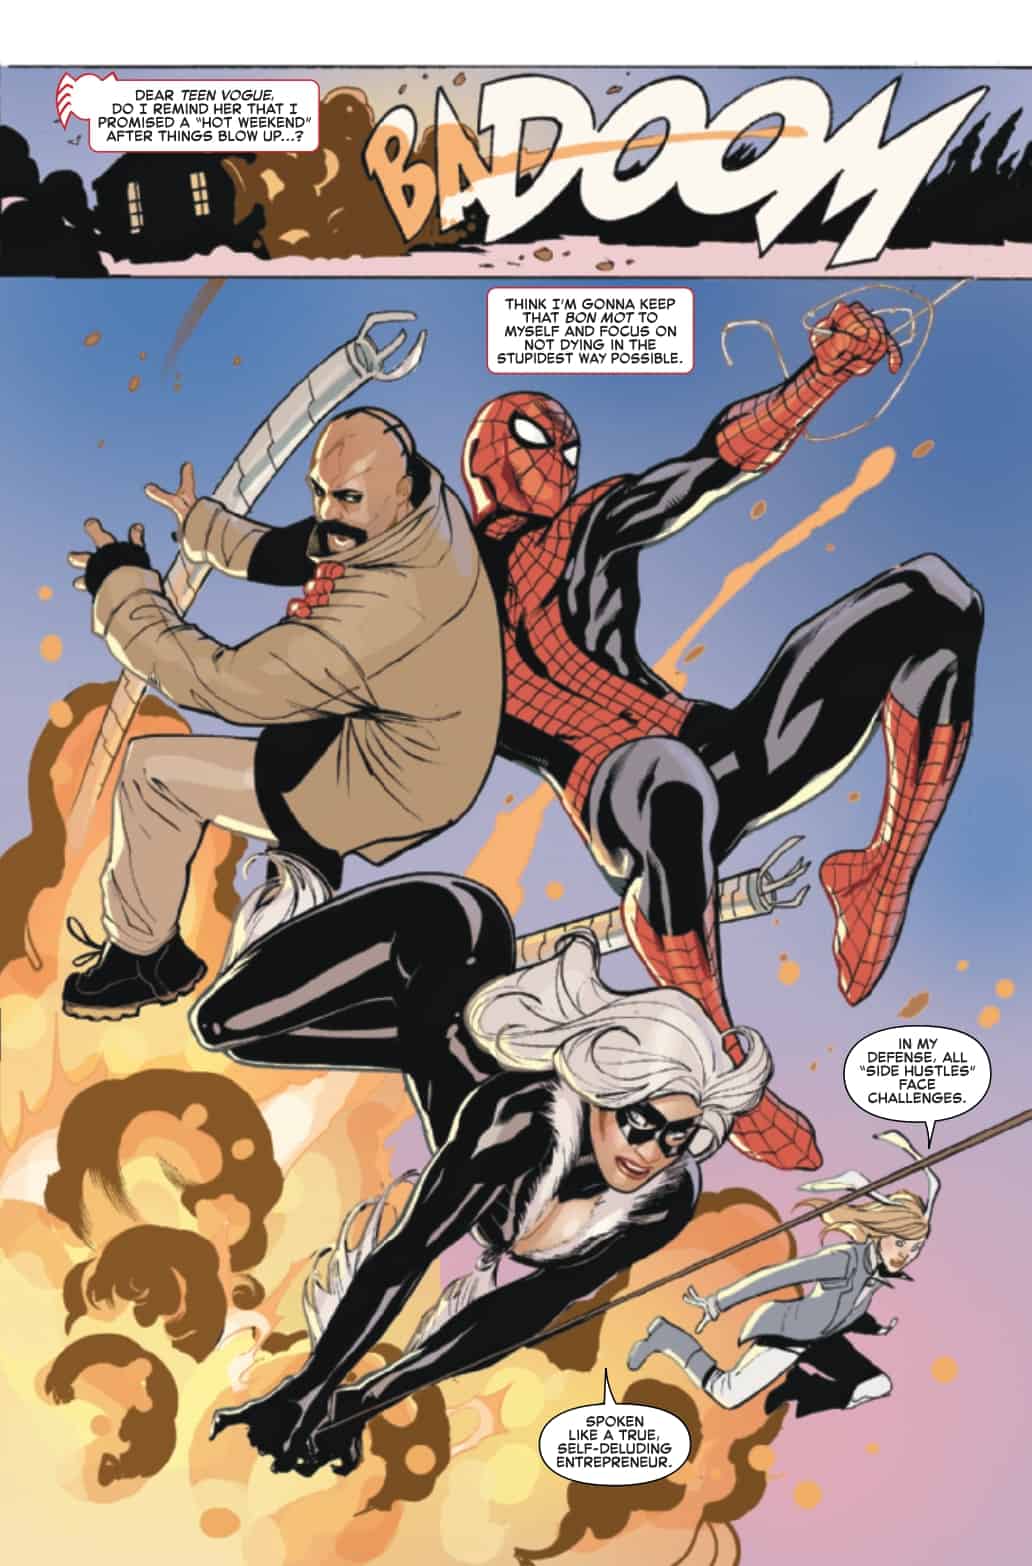 Someone Tries to Kill Spidey and Black Cat in THE AMAZING SPIDER-MAN #20 -  Comic Watch